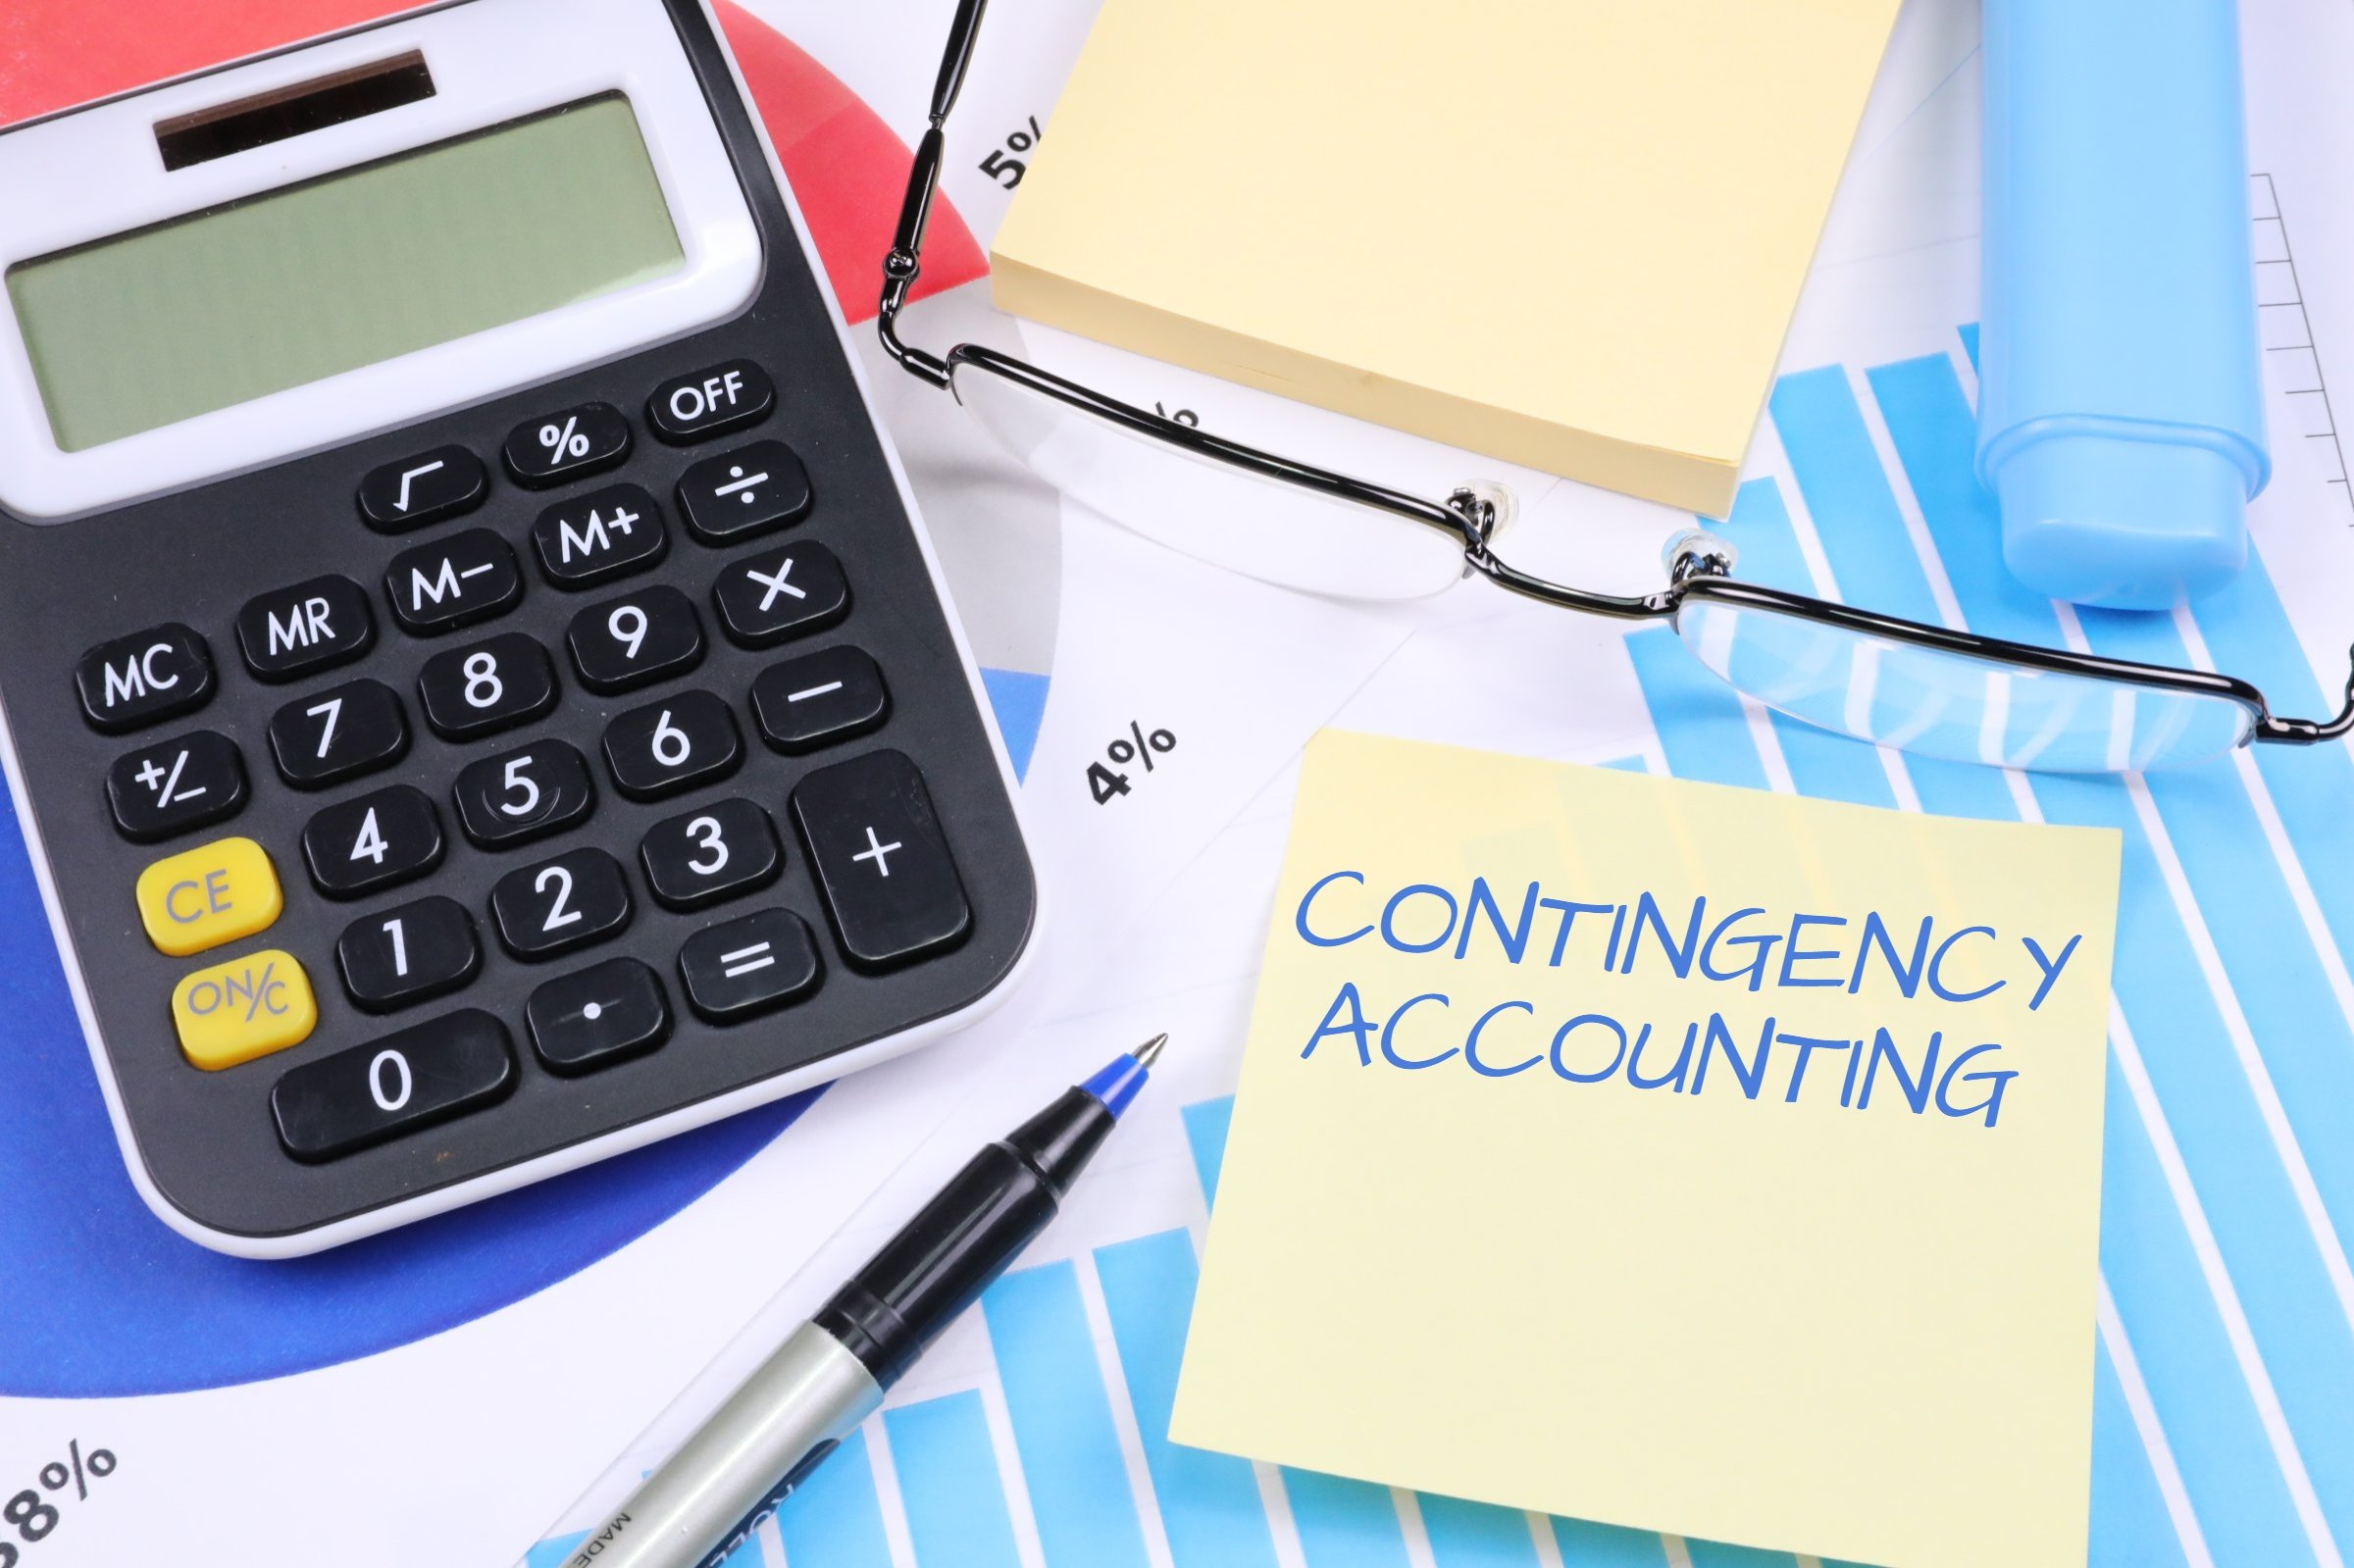 Contingency Accounting